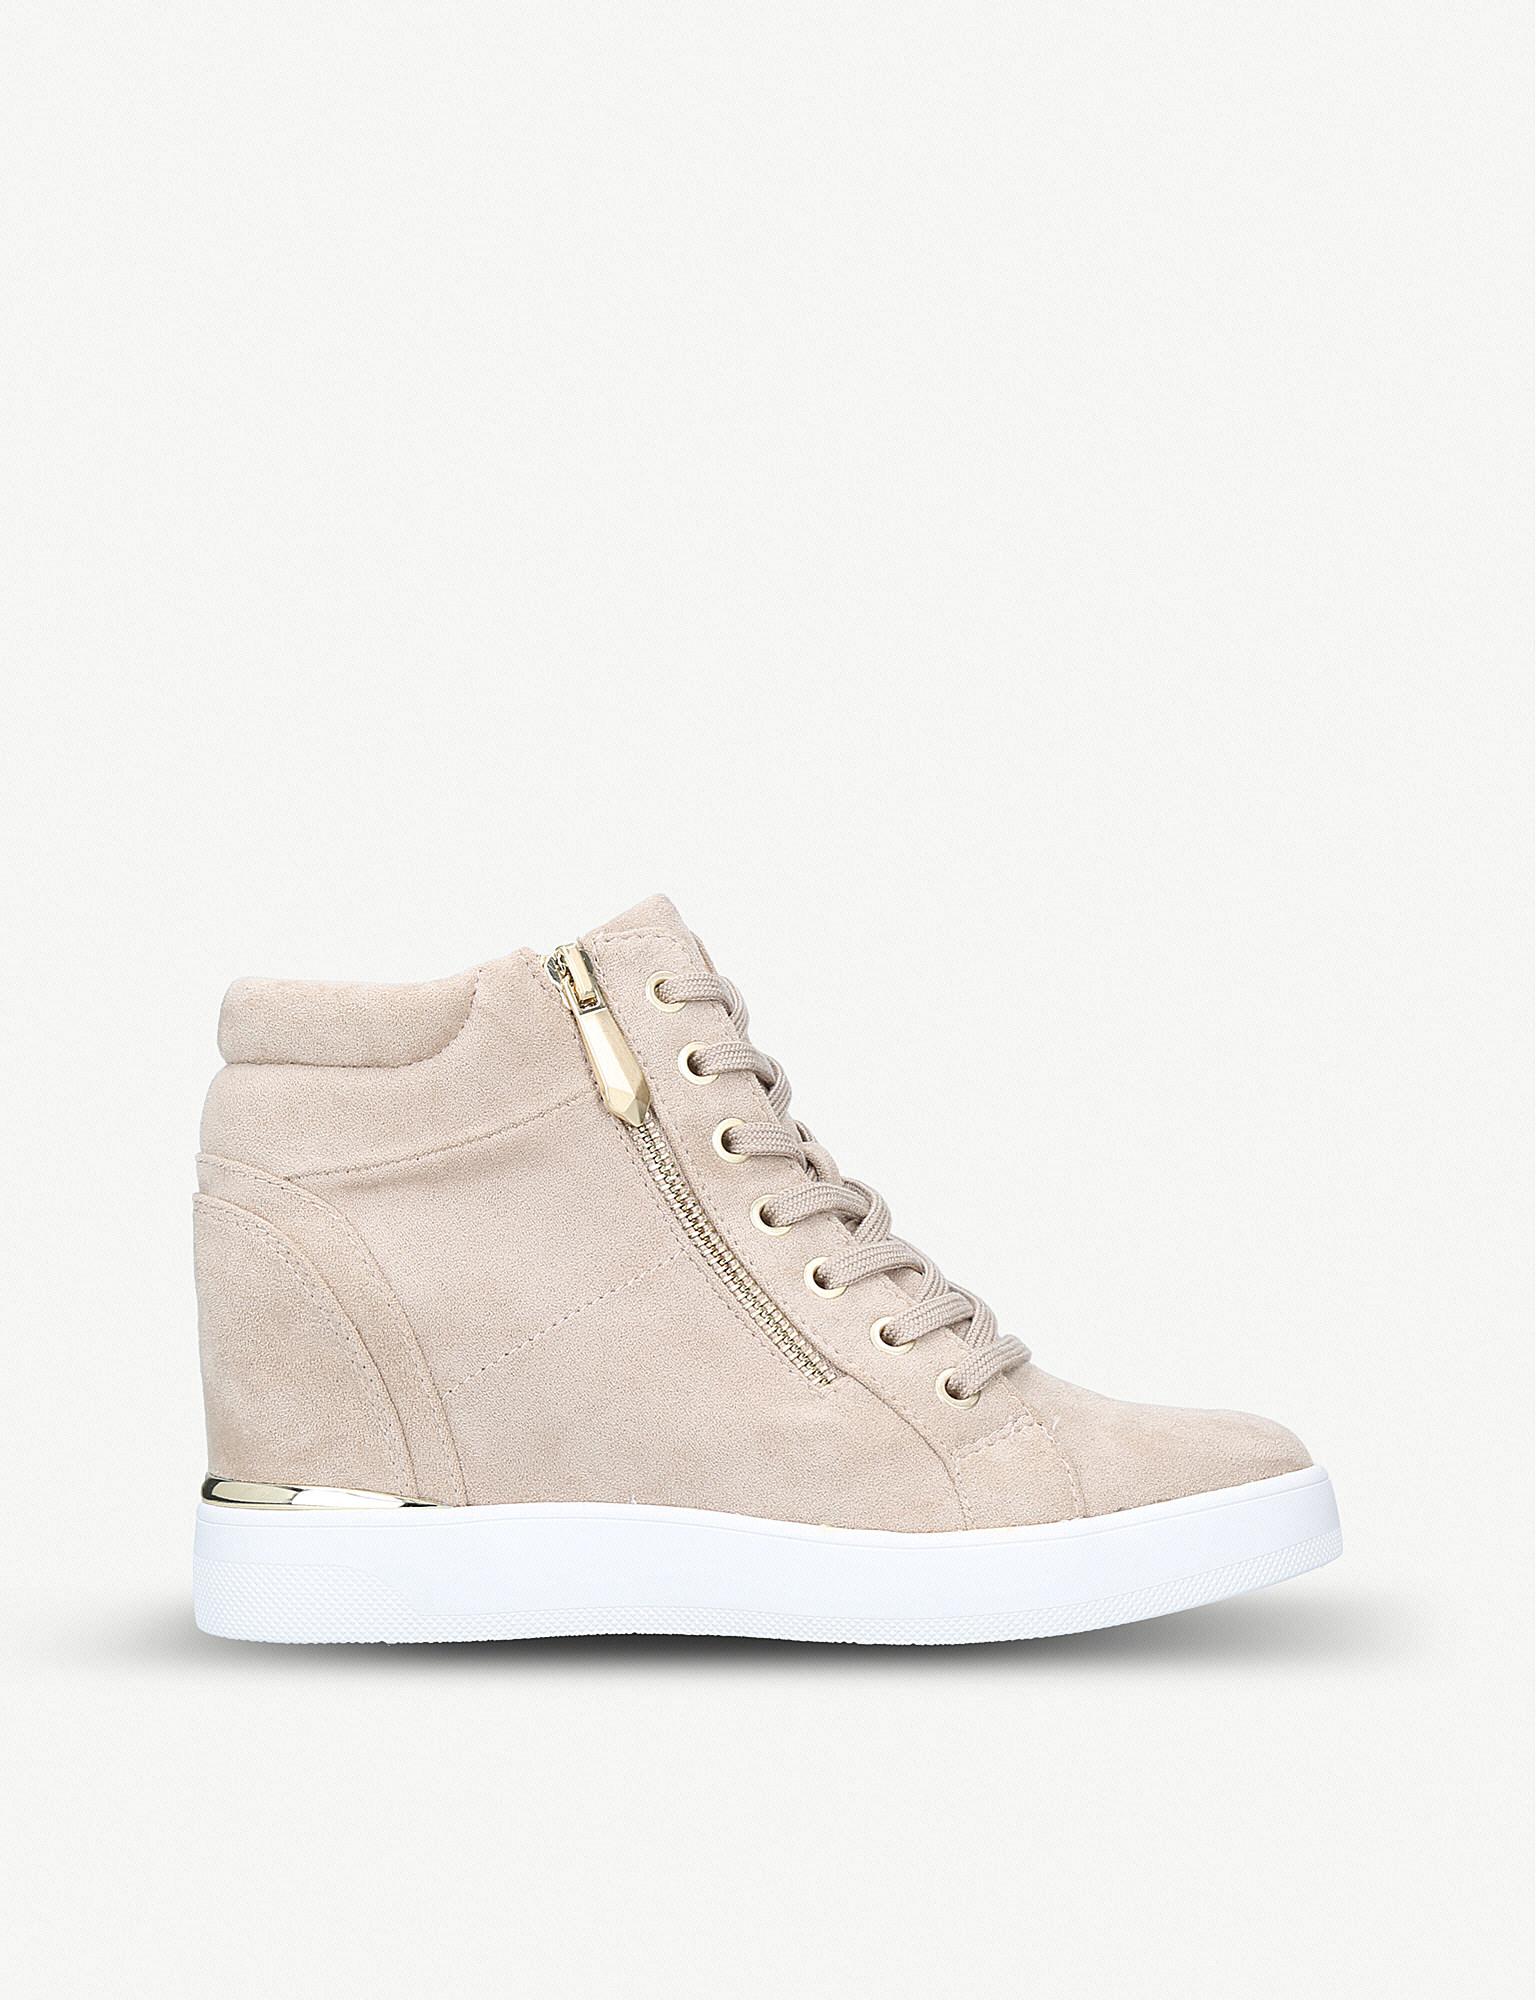 ALDO Ailanna Wedged Trainers in Natural | Lyst